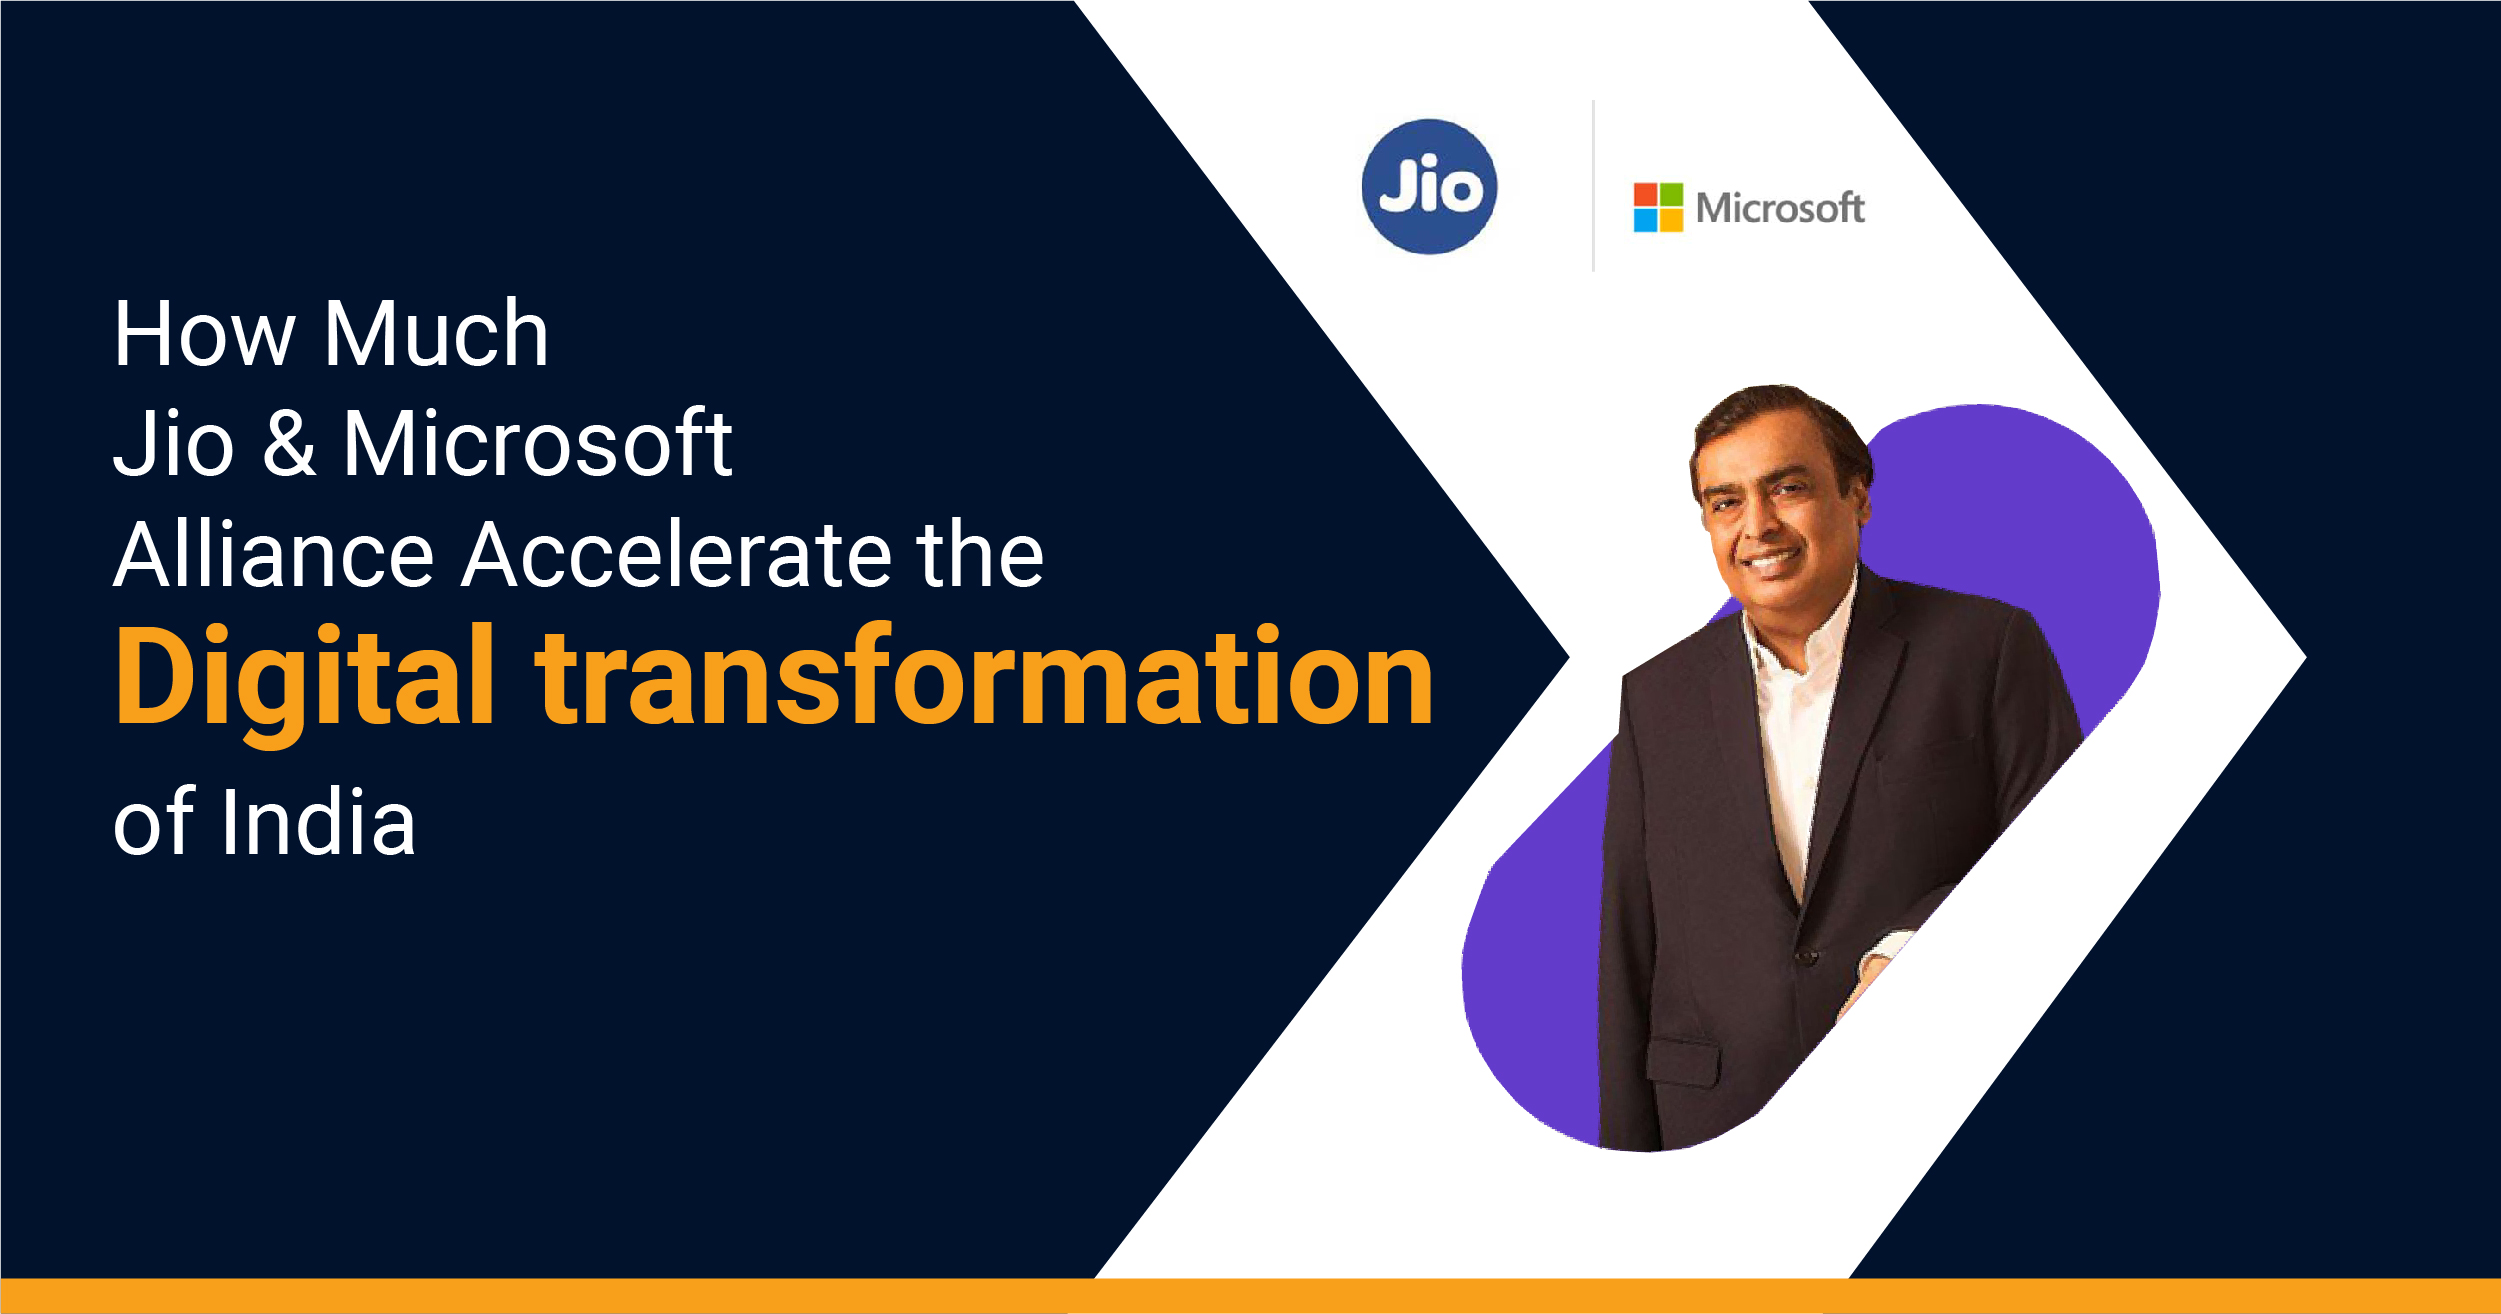 How much jio and microsoft alliance accelerate the digital transformation of india